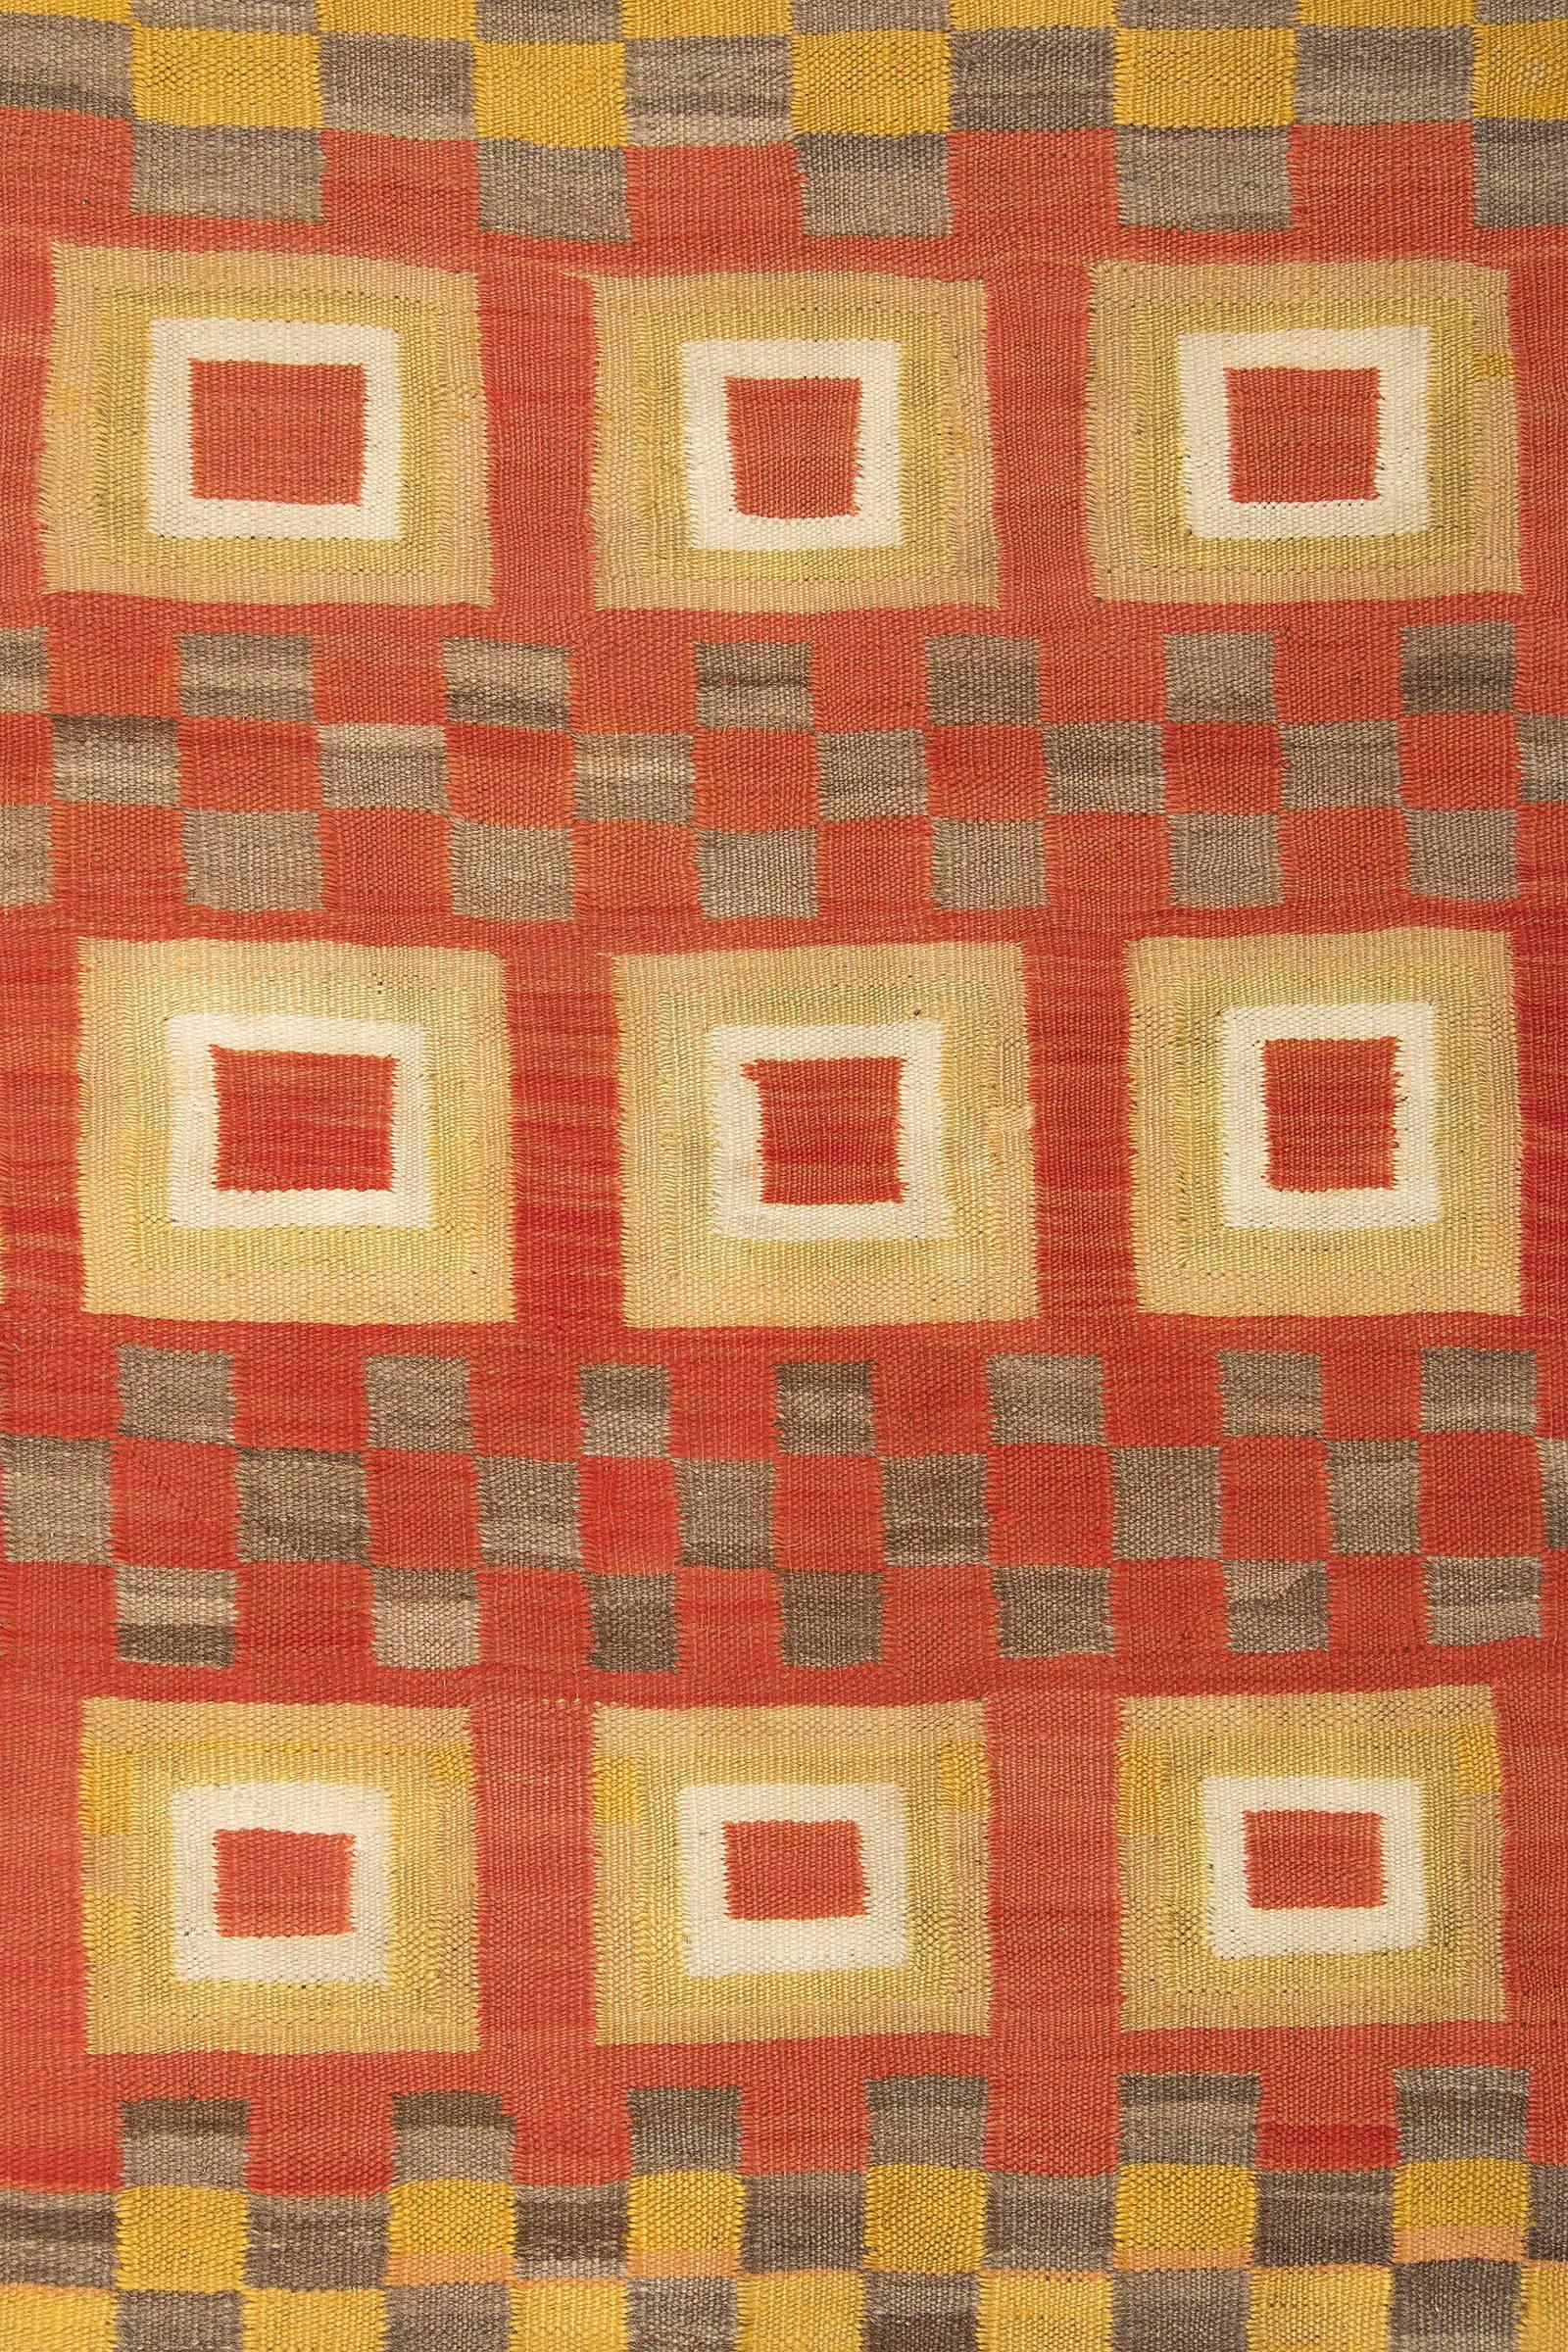 This unique textile was created during the late 19th or early 20th century by a Navajo weaver. The composition has alternating bands of inset squares and checkerboard motifs. Woven of native hand-spun wool with natural fleece and aniline dye. 
